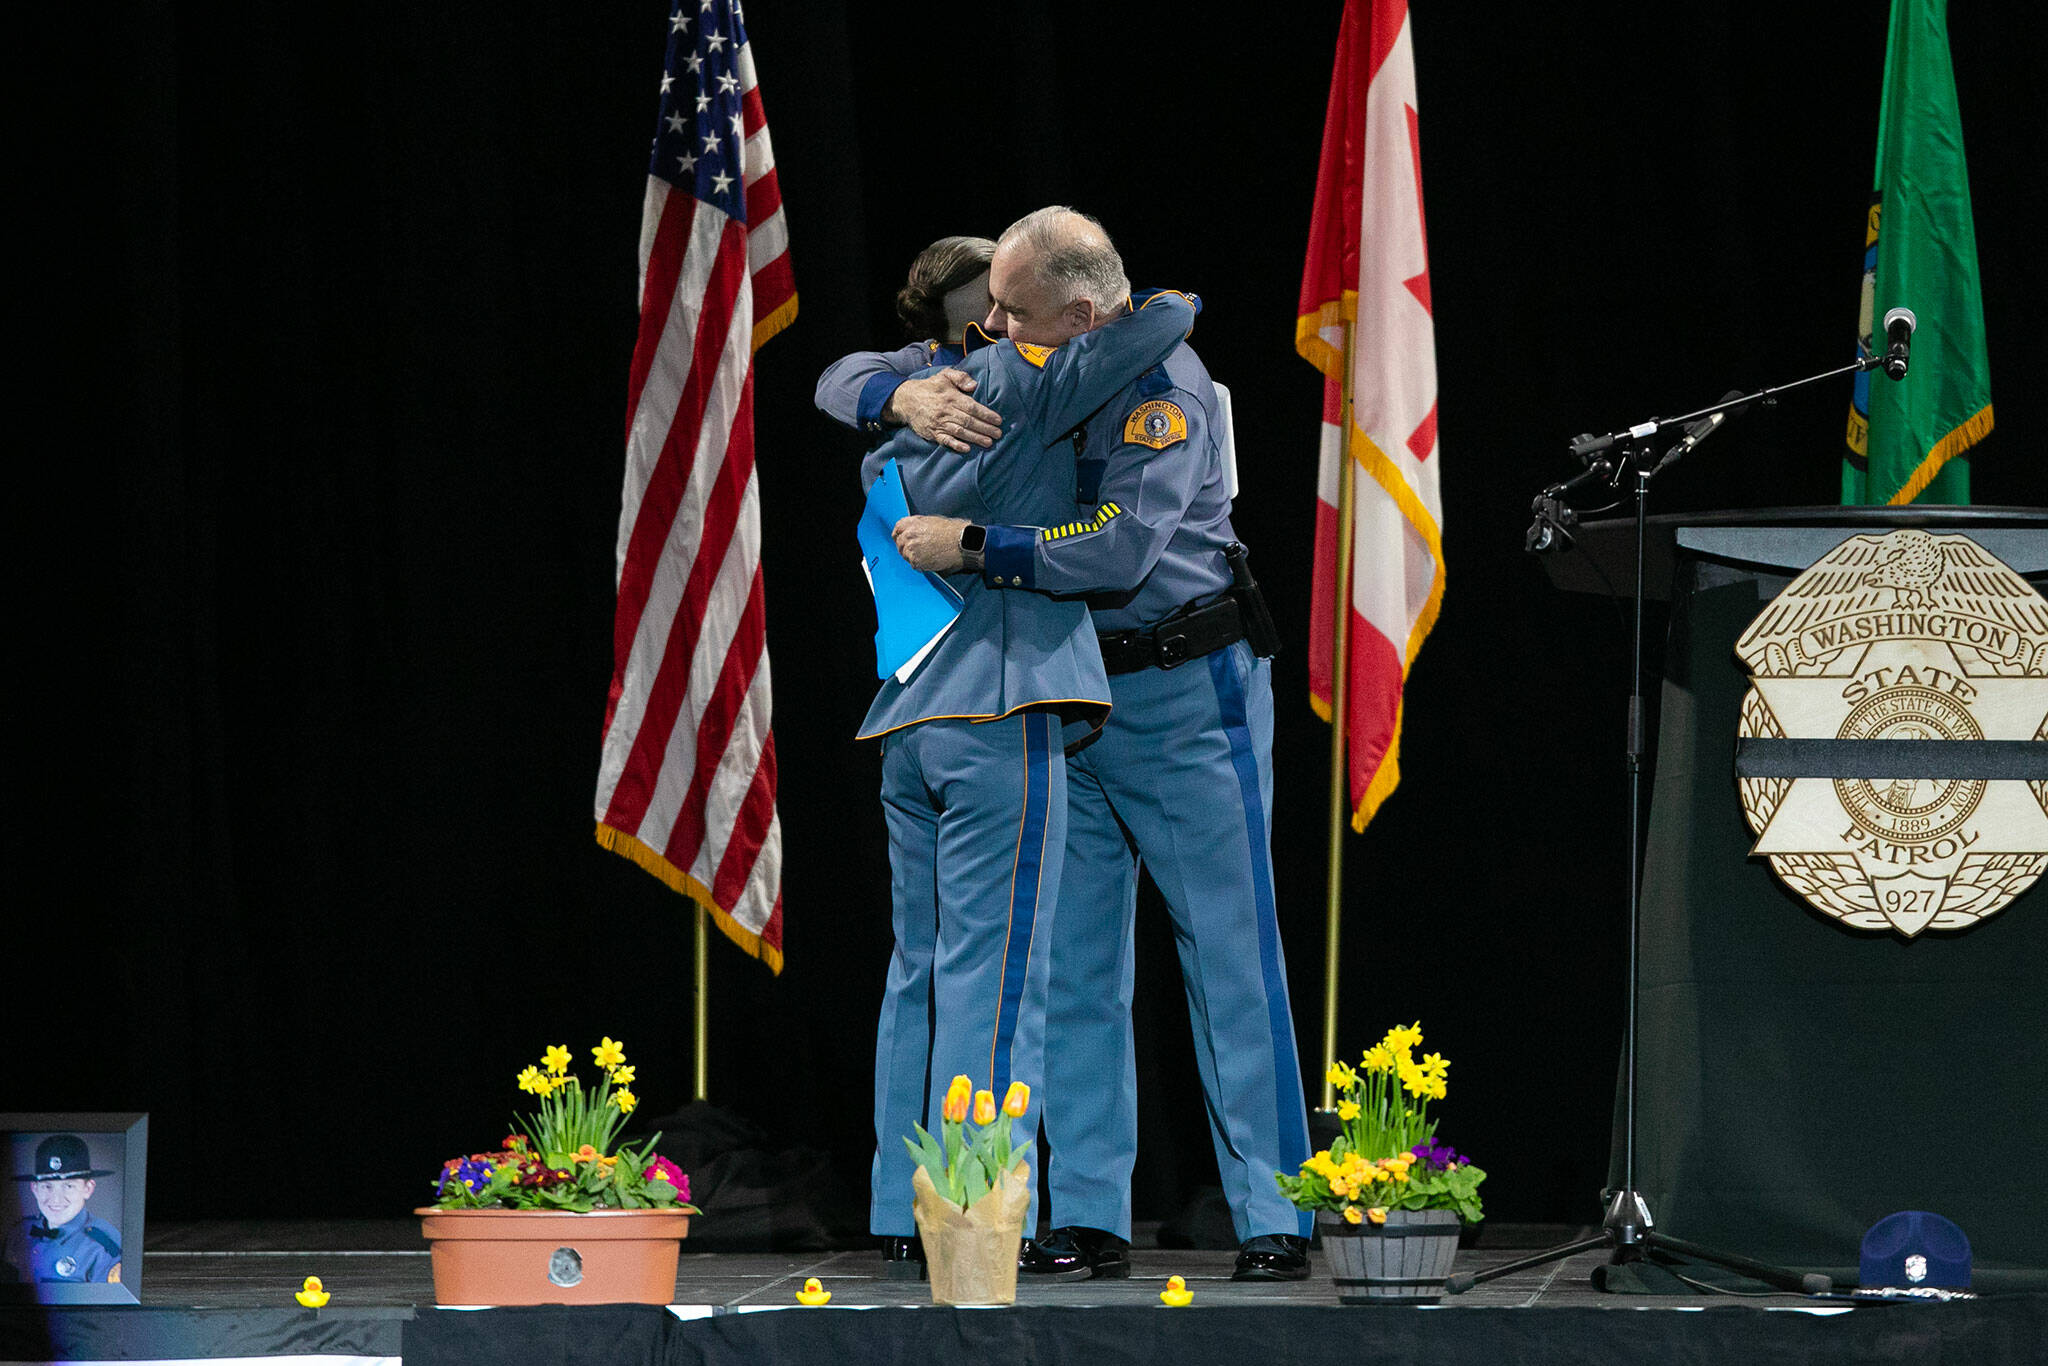 Captain Ron Mead and Corporal Alexis Robinson embrace during a memorial for Washington State Patrol trooper Chris Gadd on Tuesday, March 12 at Angel of the Winds Arena in Everett, Washington. (Ryan Berry / Sound Publishing)